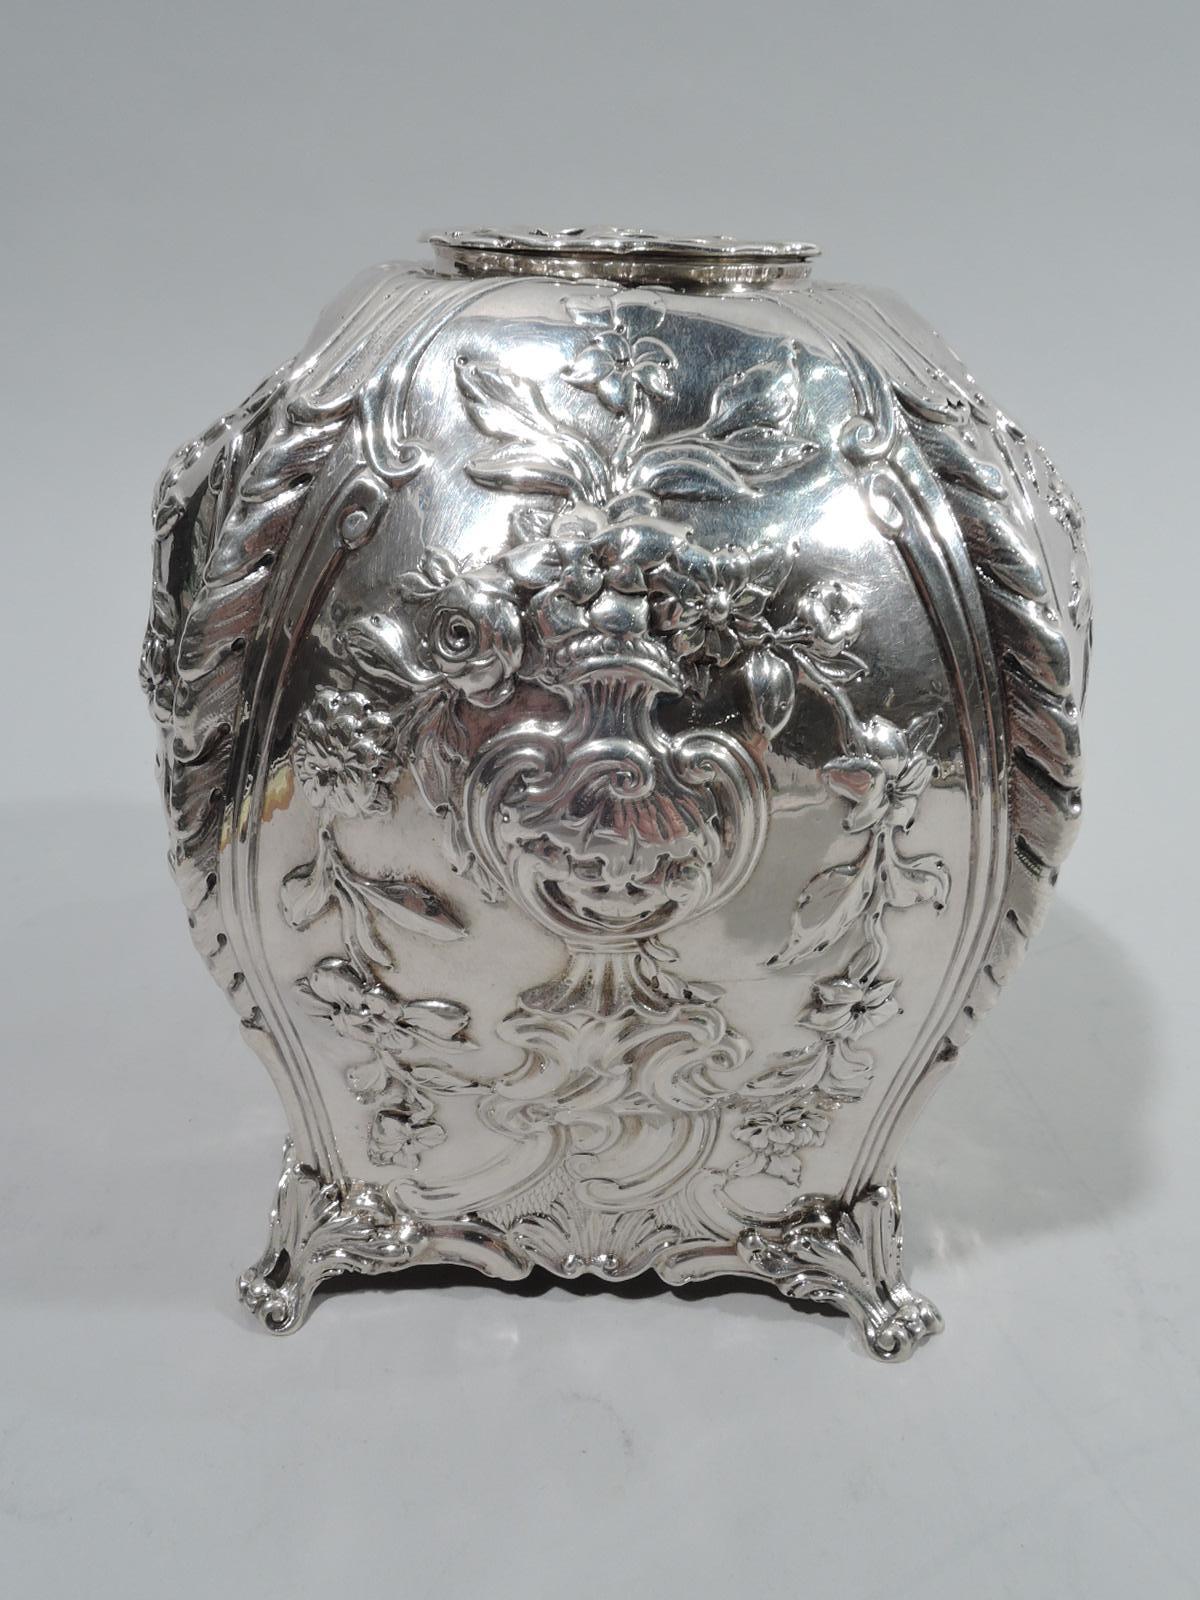 English Georgian Rococo sterling silver tea caddy, 1766. Bombe with corner leaf-mounted volute scroll supports. Chased scrollwork and flower baskets framed by garlands. Asymmetrical cartouche engraved with armorial bird. Round and flat cover central